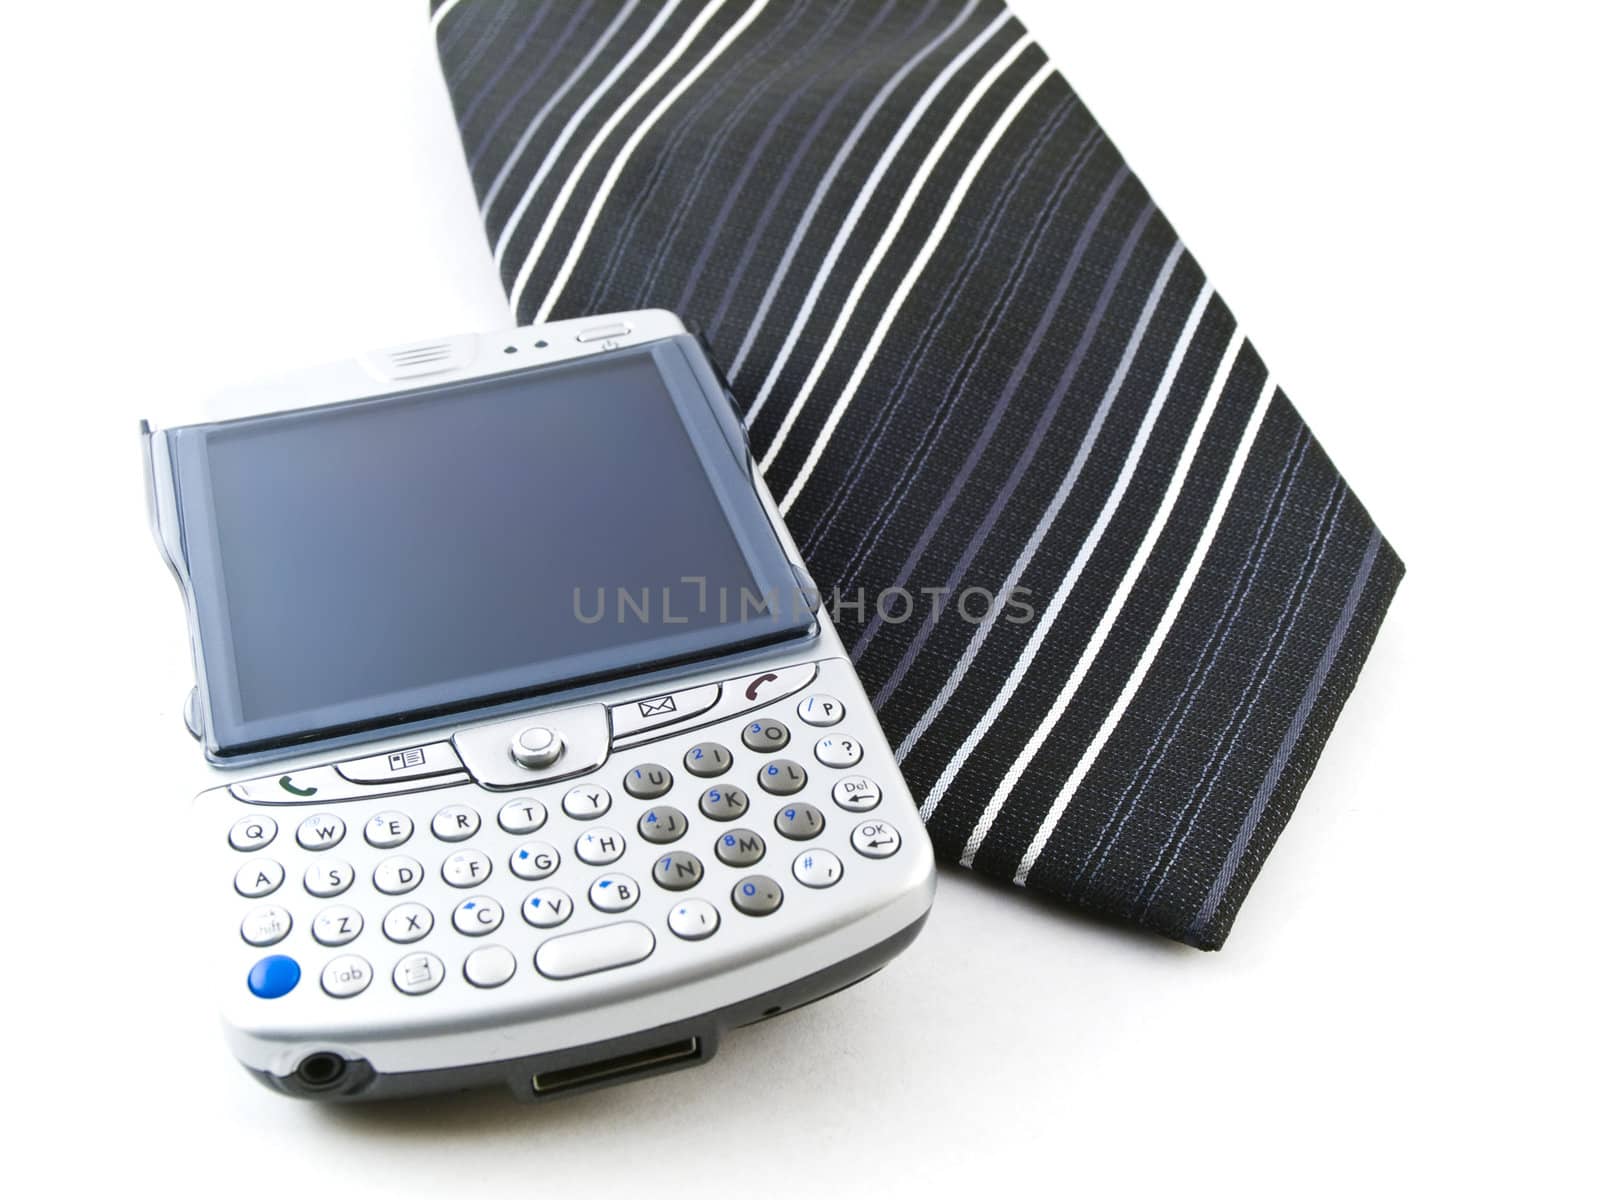 Mobile Phone and Tie on White Background